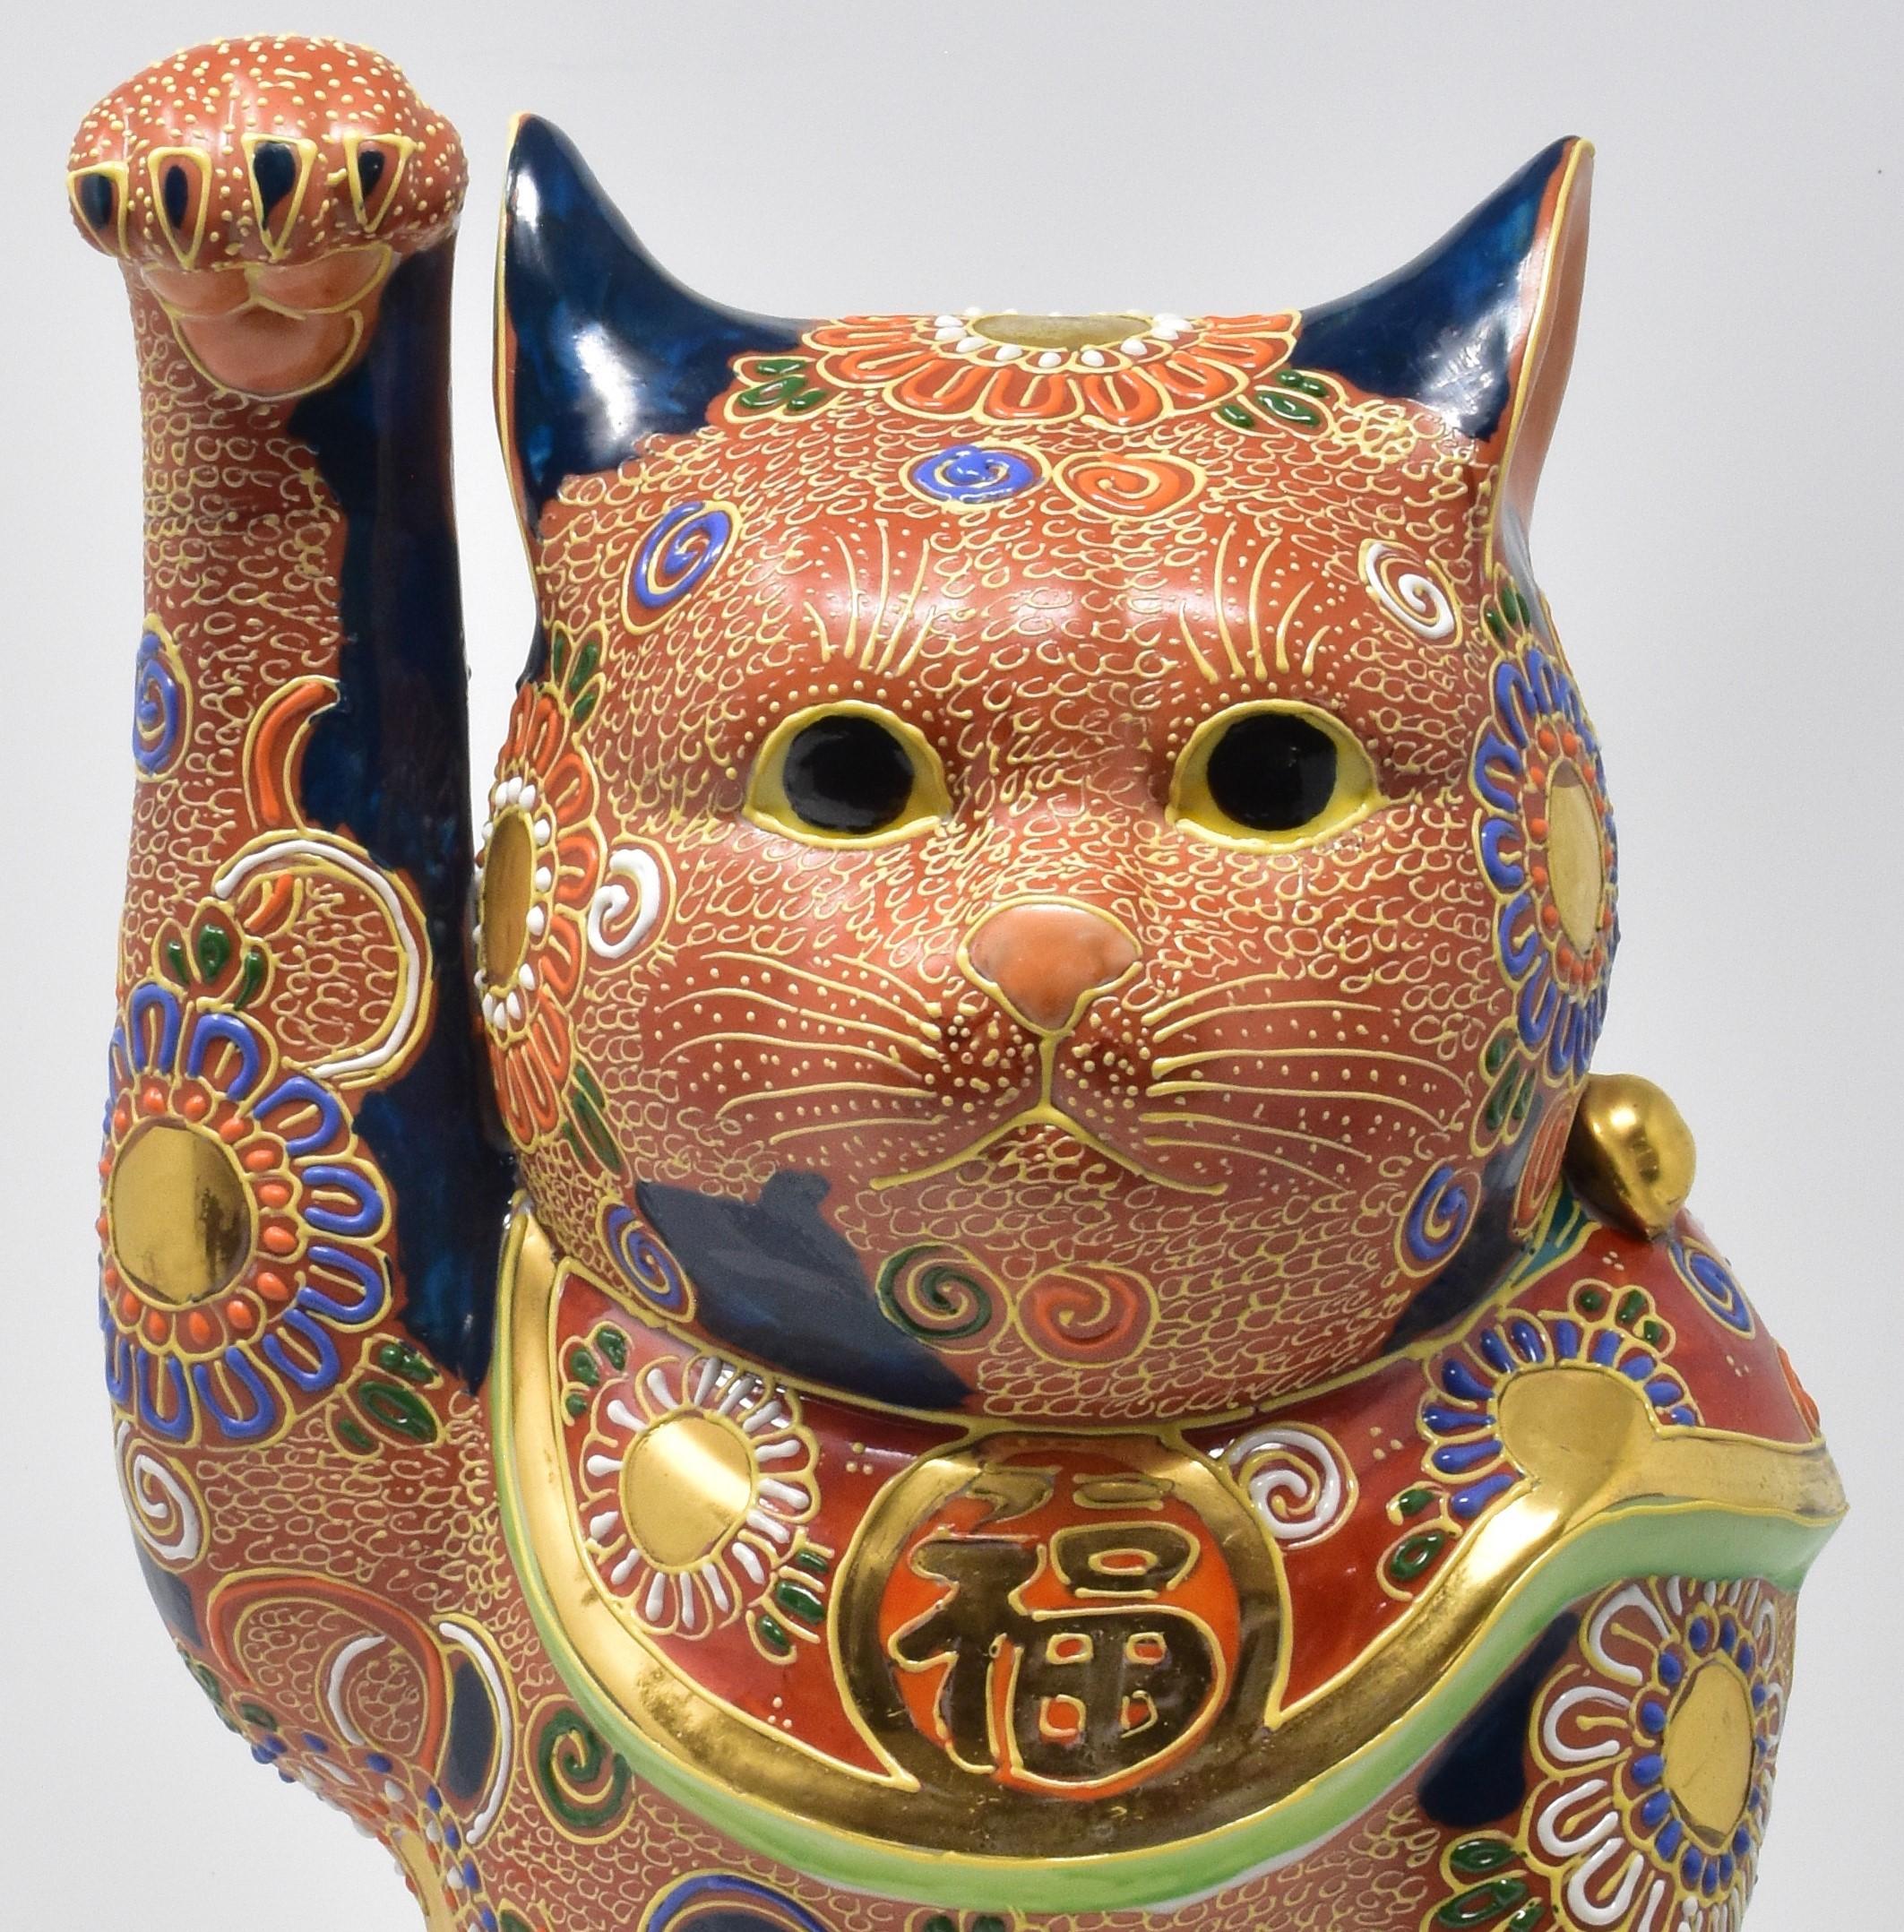 Large contemporary Japanese lucky cat (maneki neko,) a gilded and extremely intricately hand painted porcelain lucky cat raising his right paw, from the Kutani region of Japan. This cat in orange/brown, red, green and dark blue is adorned with